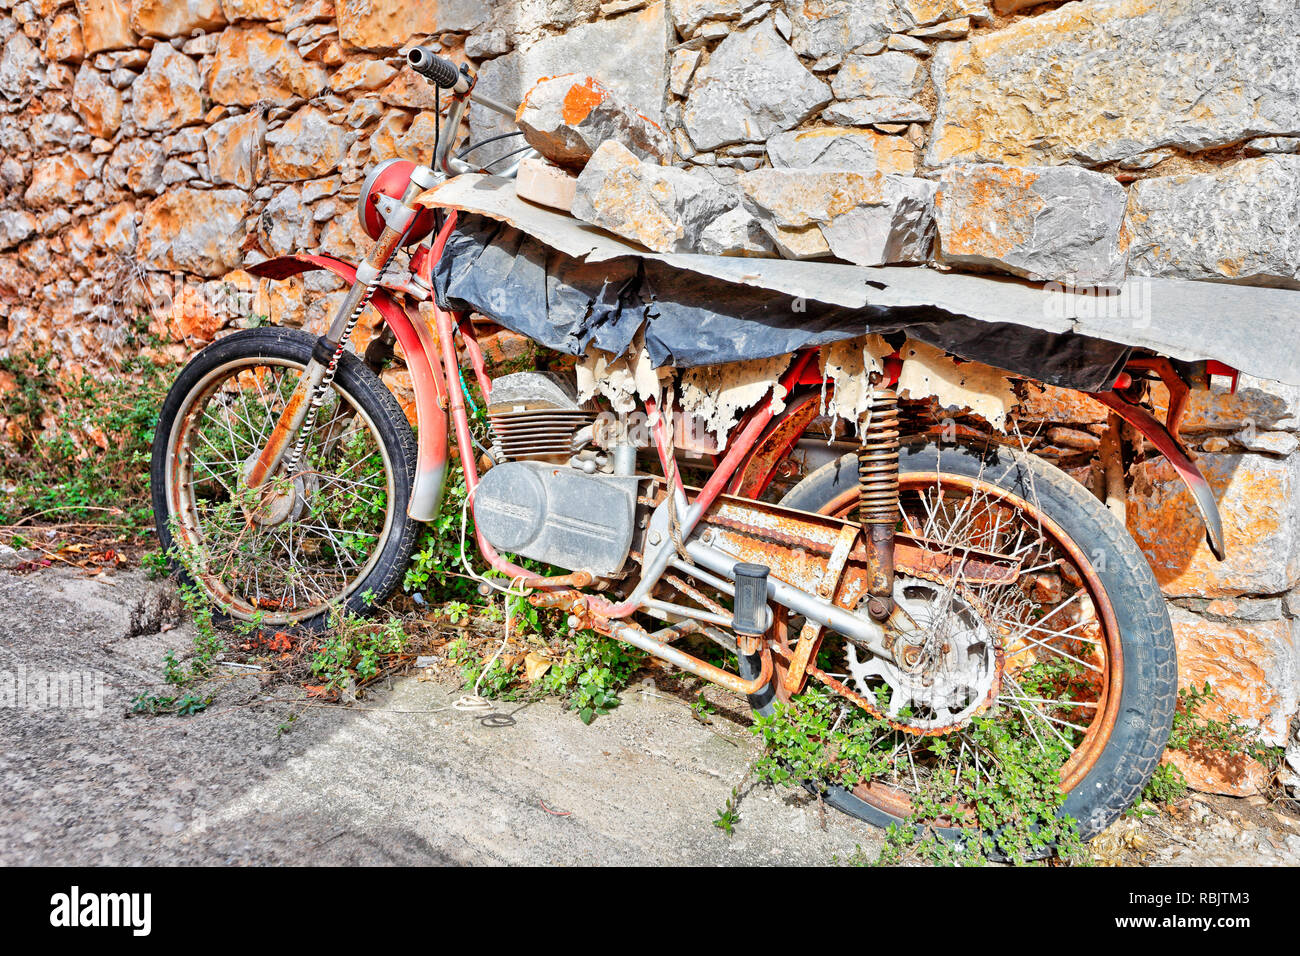 Ruined motorcycle in the medieval mastic village of Vessa on the island of Chios, Greece Stock Photo